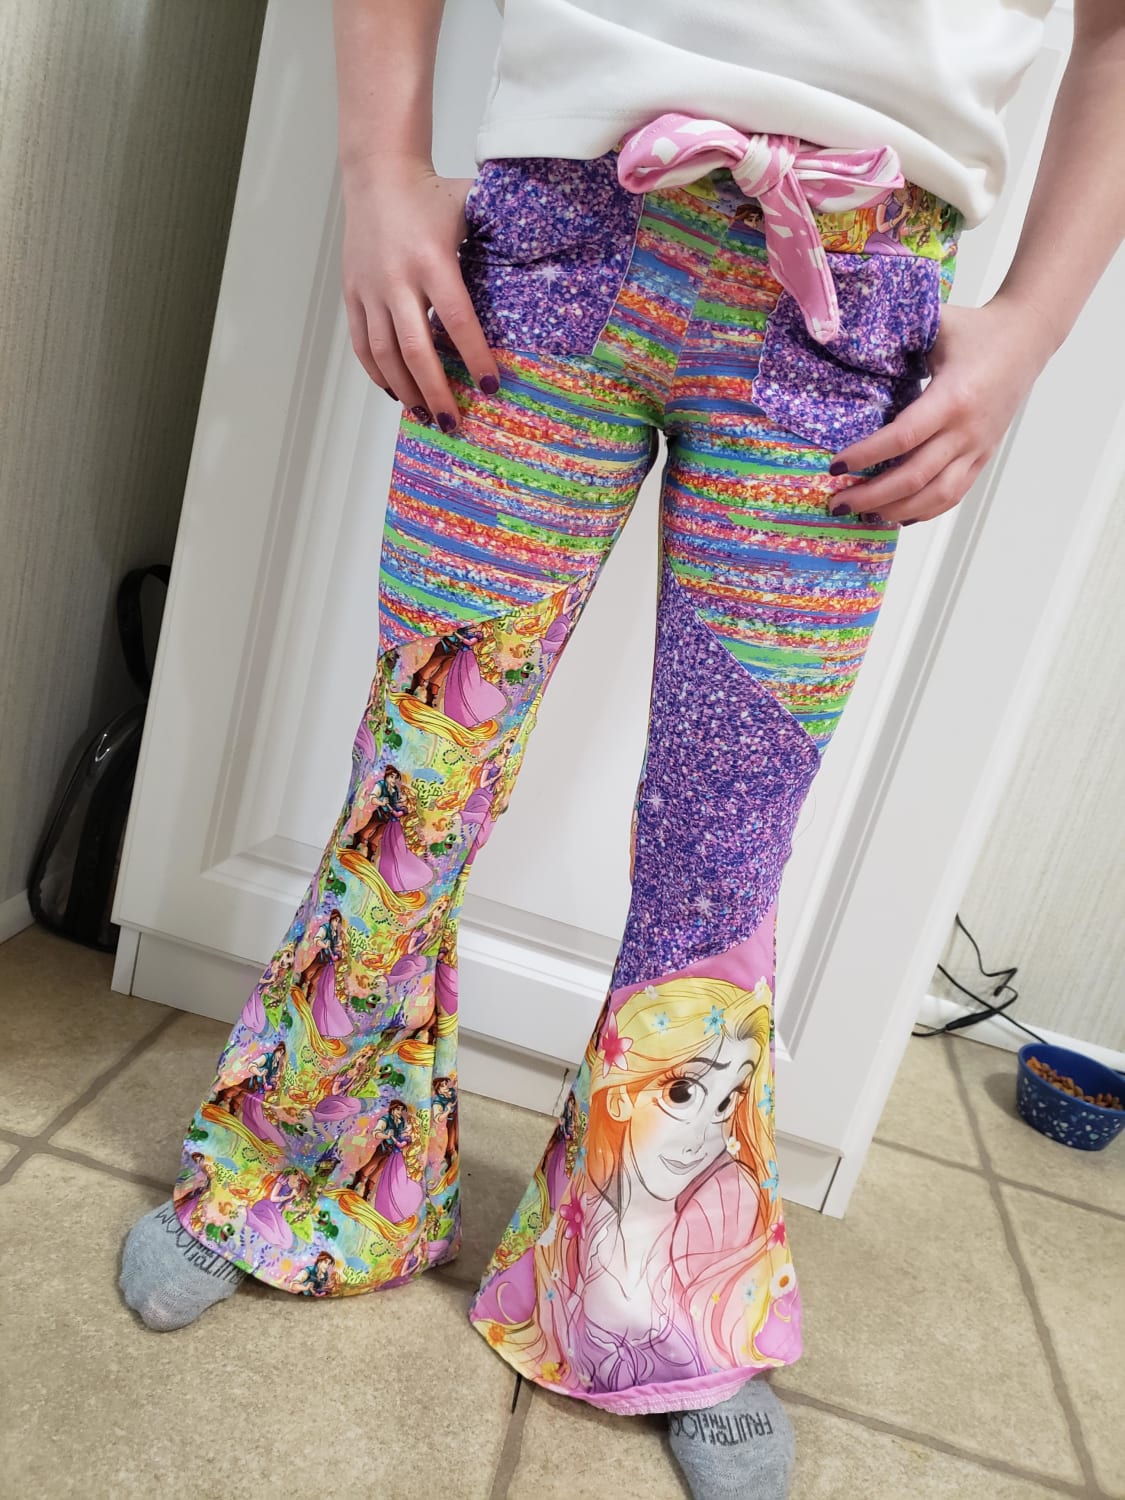 She wanted pants with glitter, purple and rapunzel! These are modified bailey bells by made for mermaids patterns sewn with cotton lycra fabric!